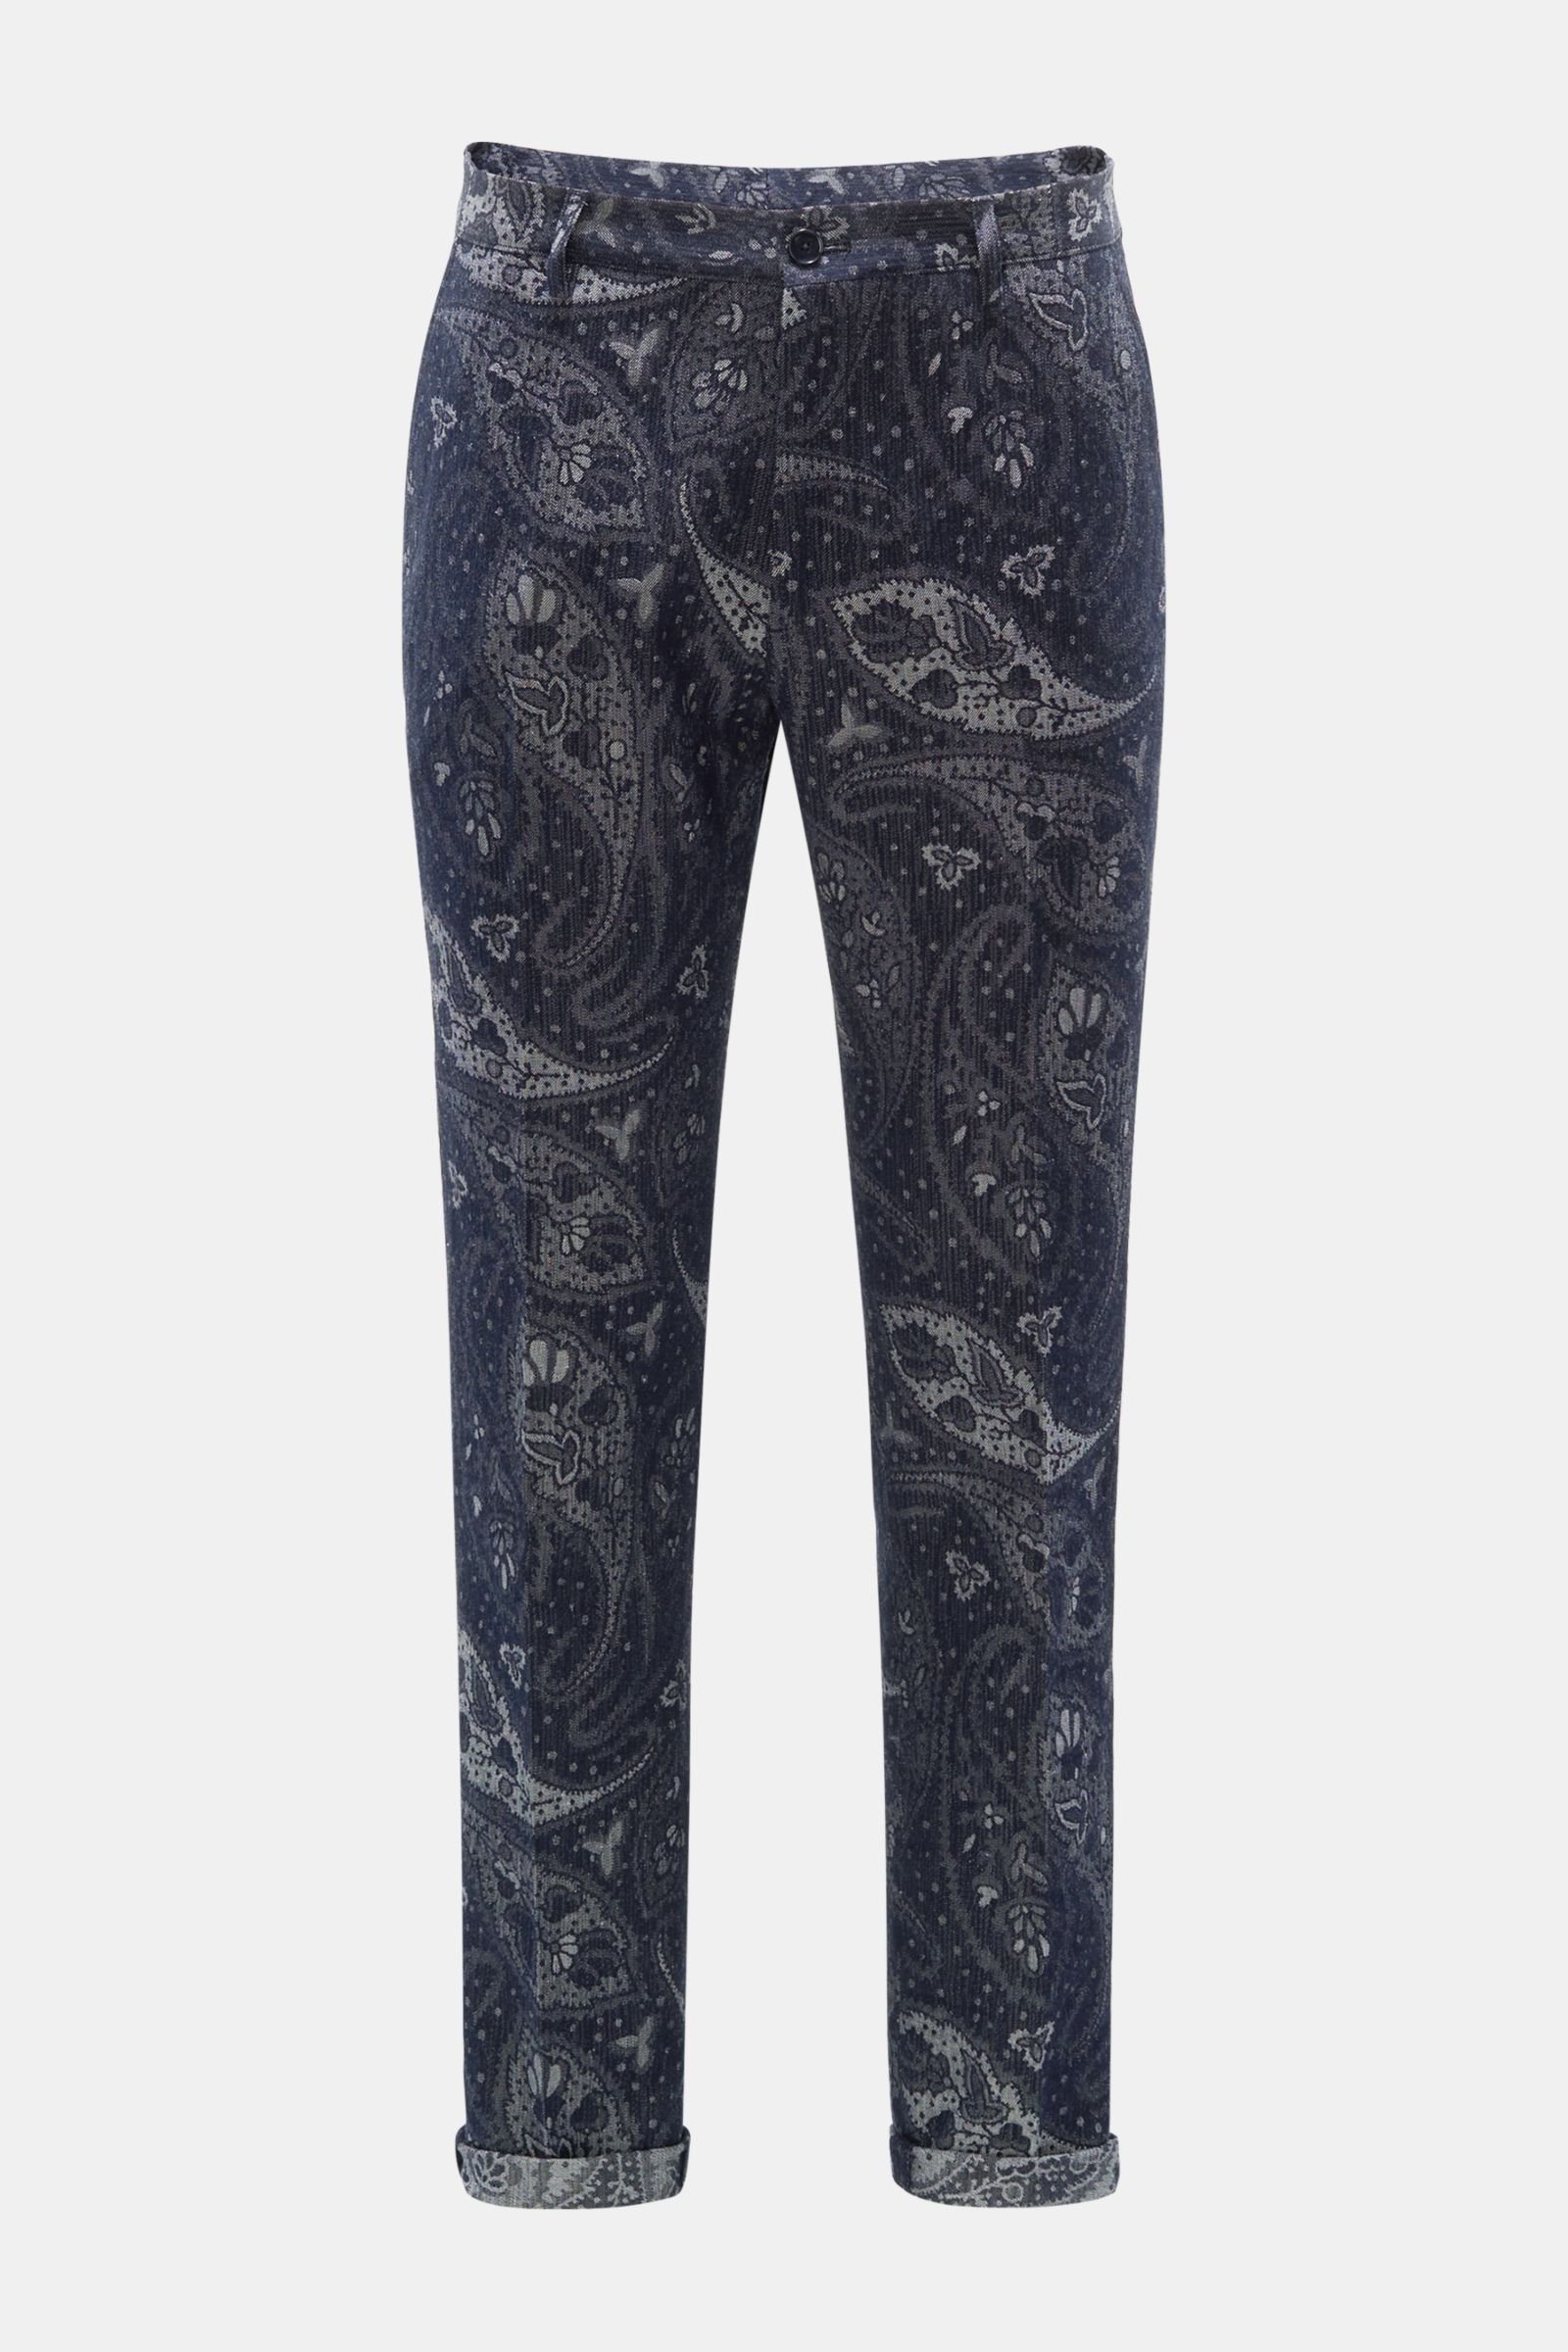 Jacquard trousers navy patterned